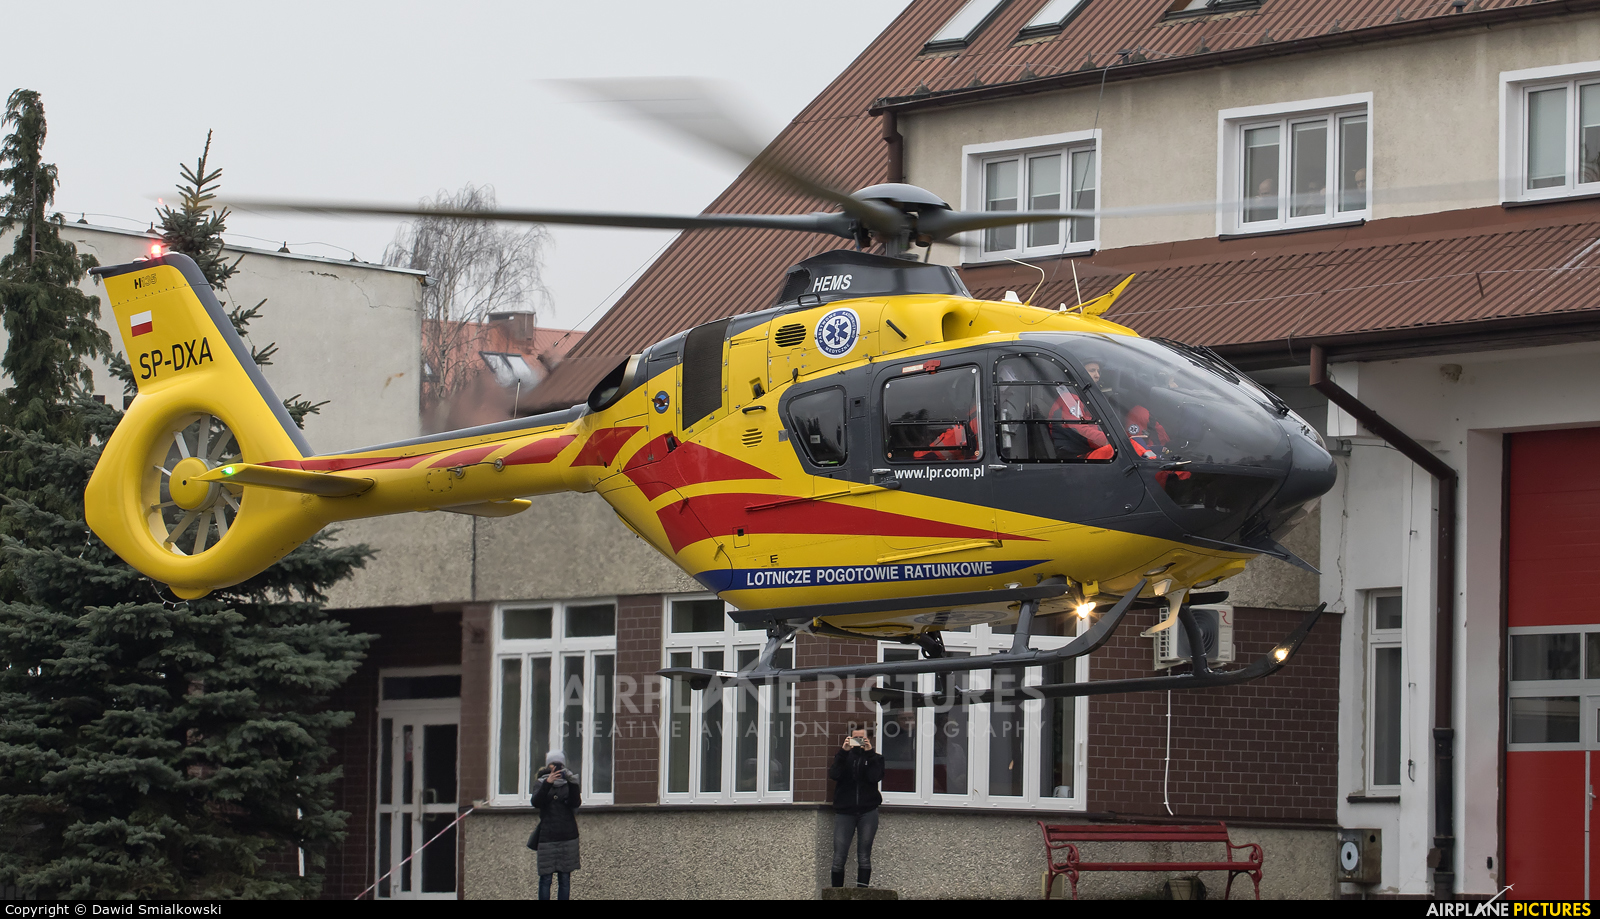 Polish Medical Air Rescue - Lotnicze Pogotowie Ratunkowe SP-DXA aircraft at Off Airport - Poland